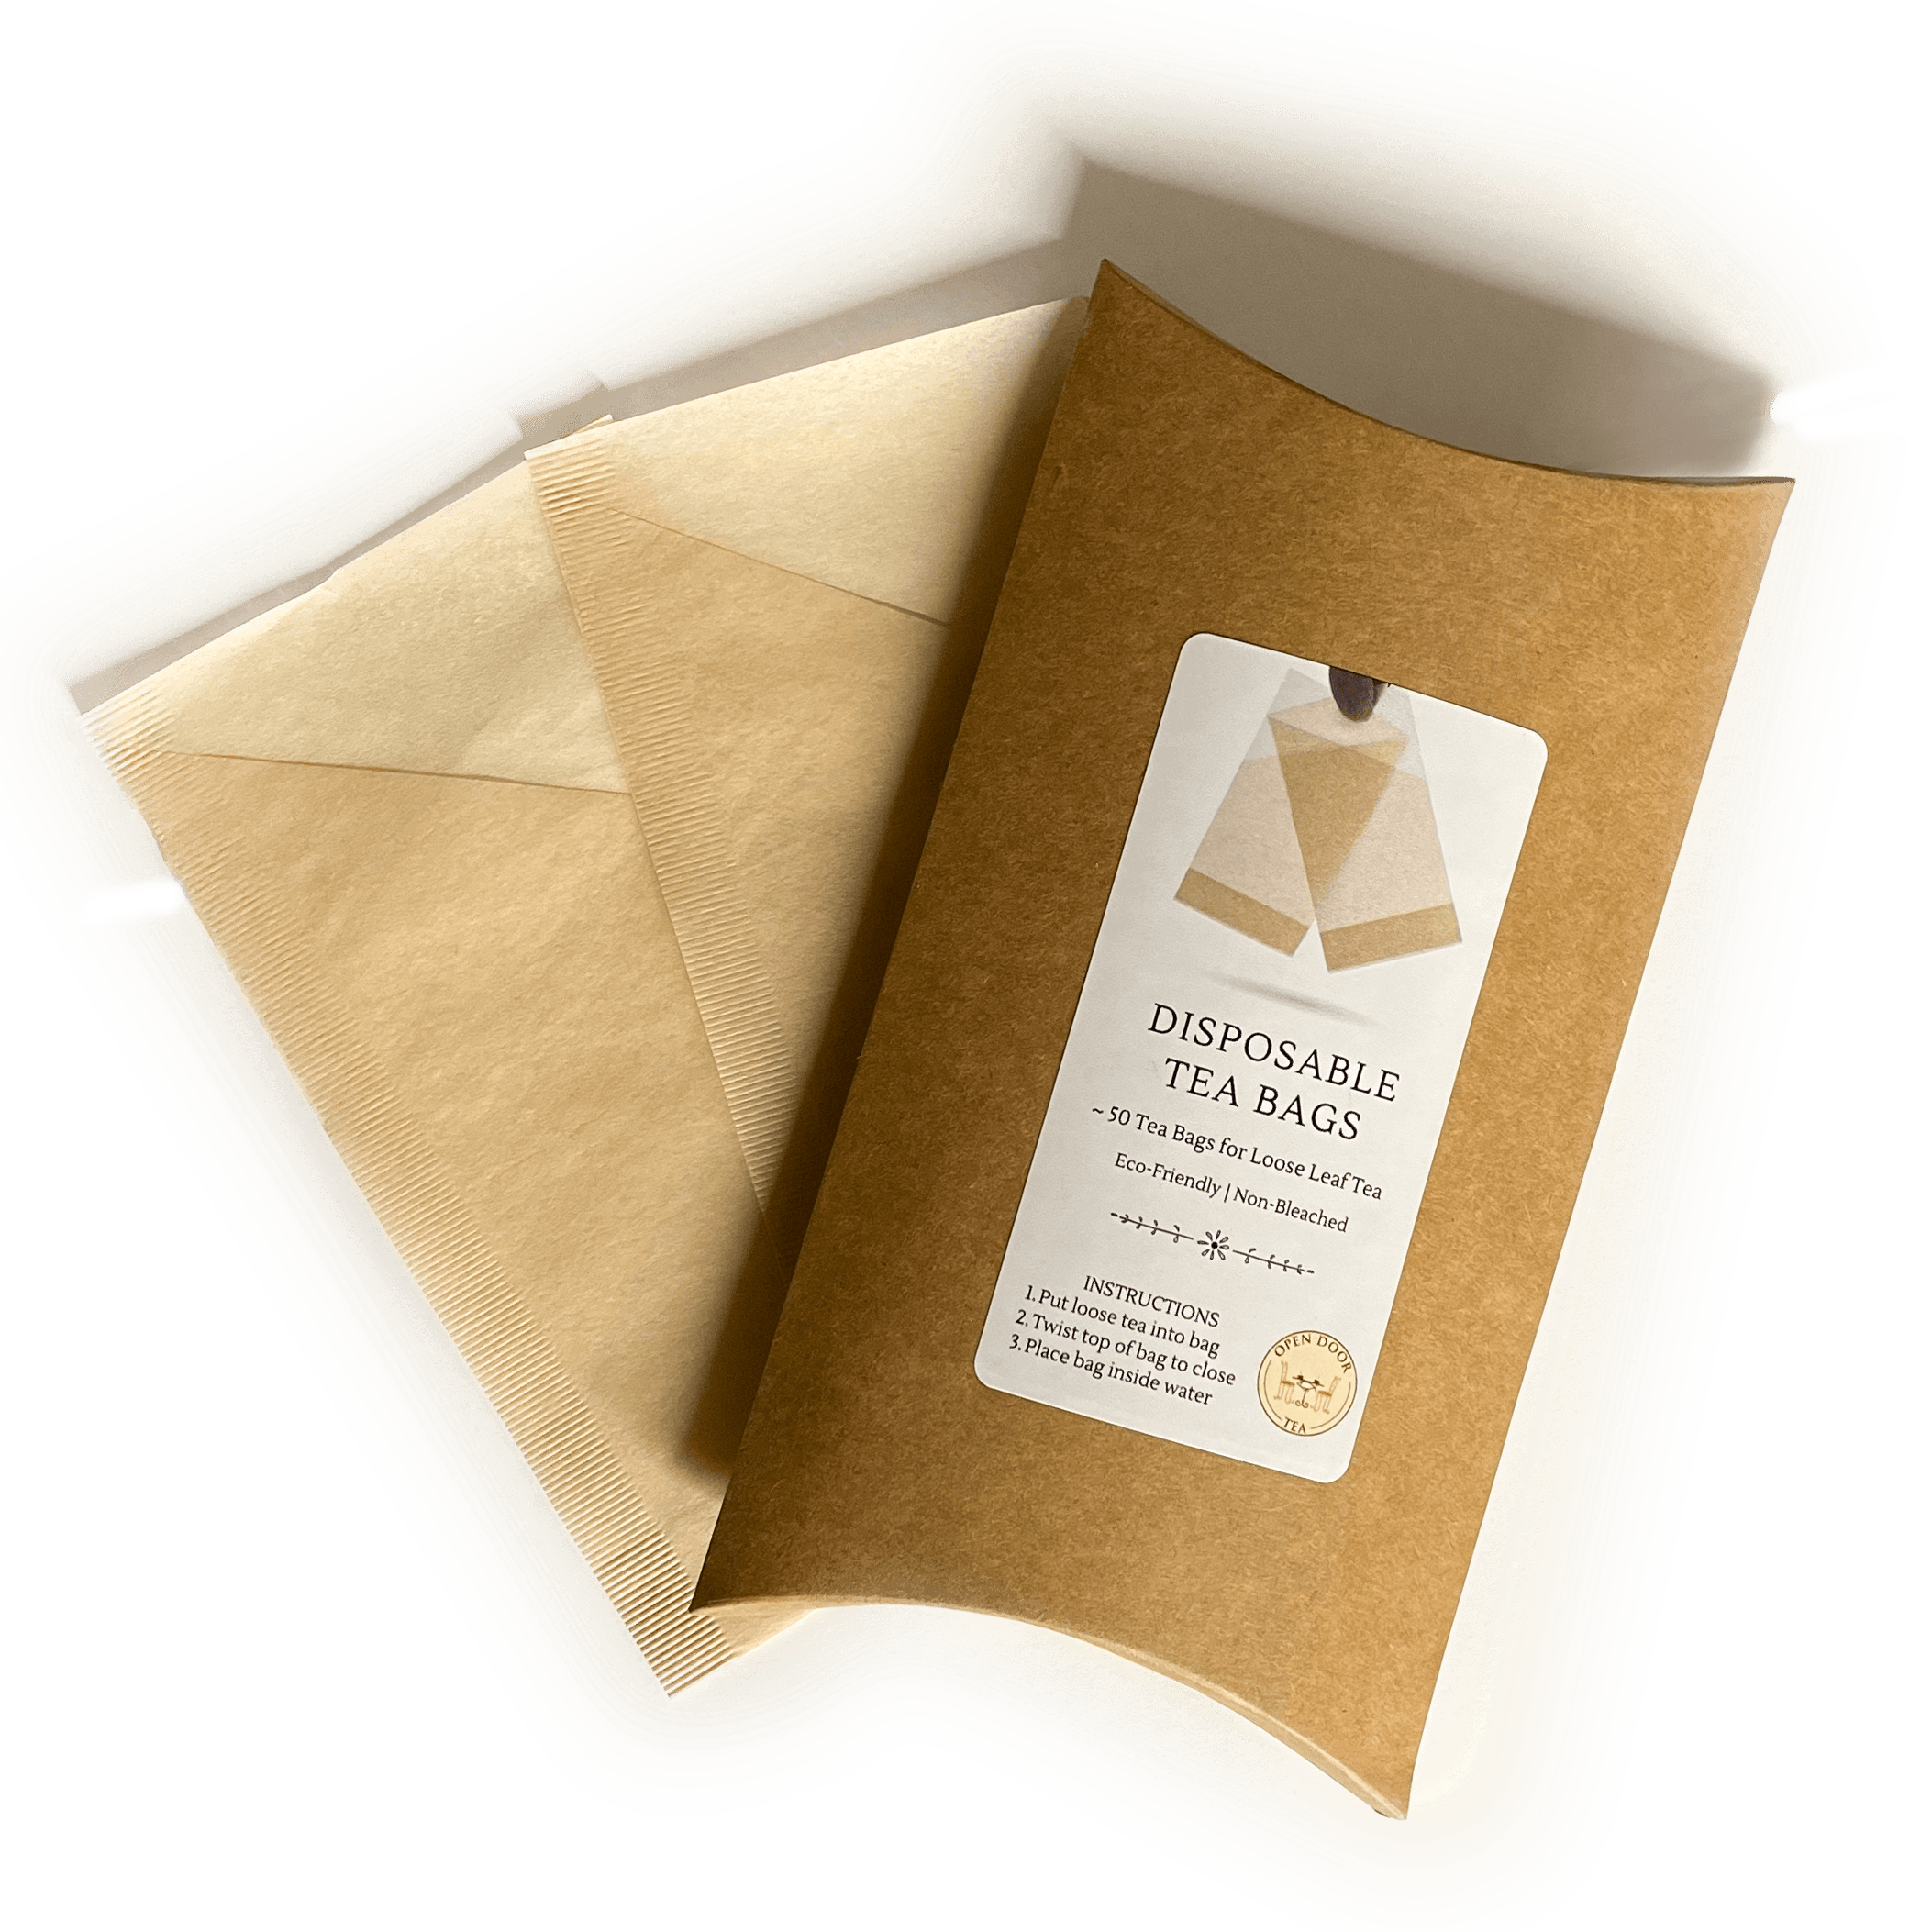 Plastic Free Tea Bags: Which Brands are really Plastic Free?